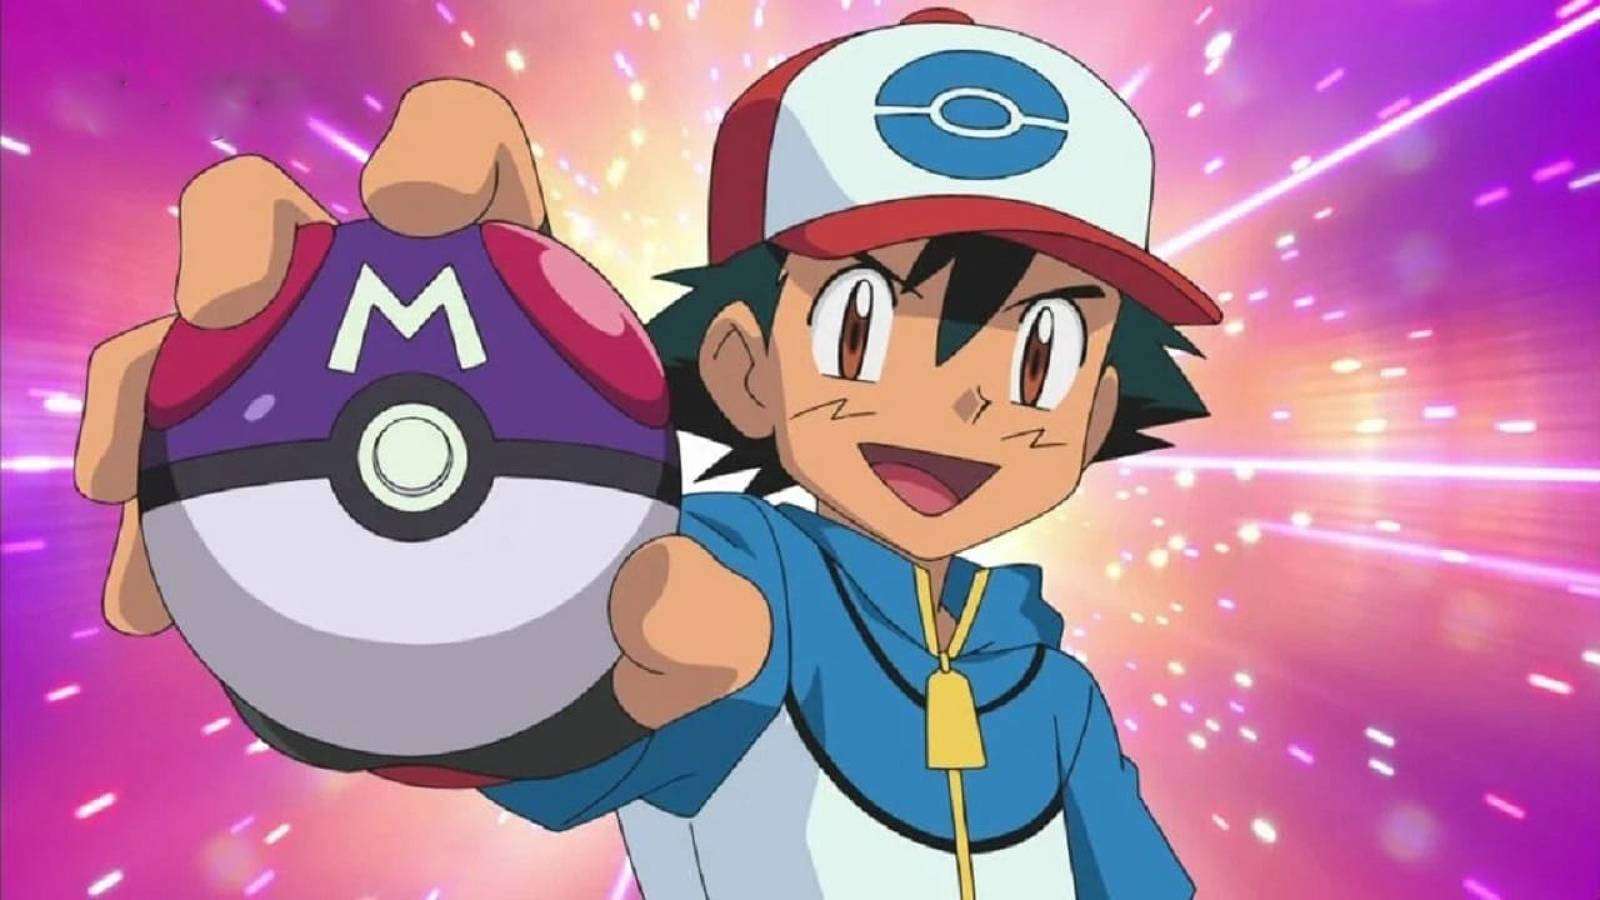 Ash Ketchum holds a Master Ball in his hand